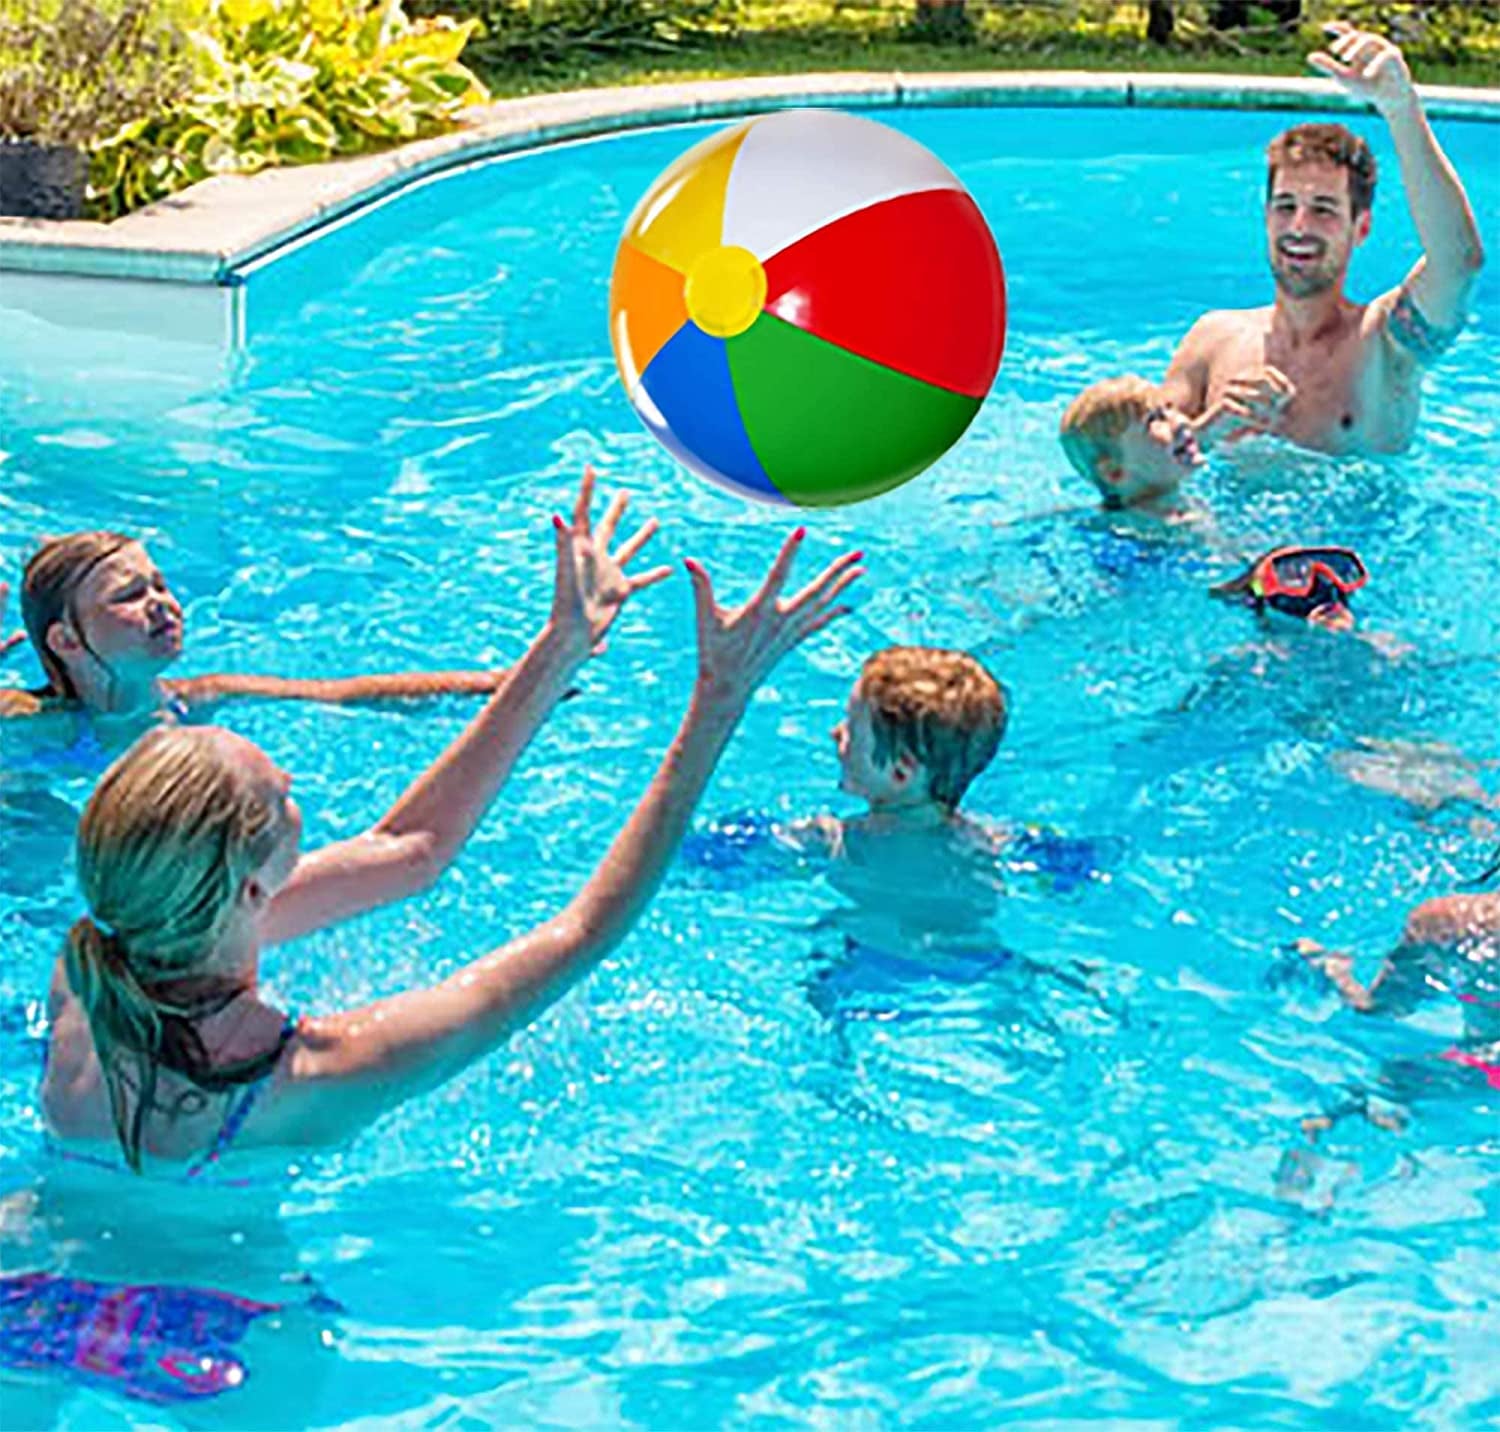 Beach Balls 3 Pack 20" Inflatable for Kids - Toys & Toddlers, Pool Games, Toy Classic Rainbow Color